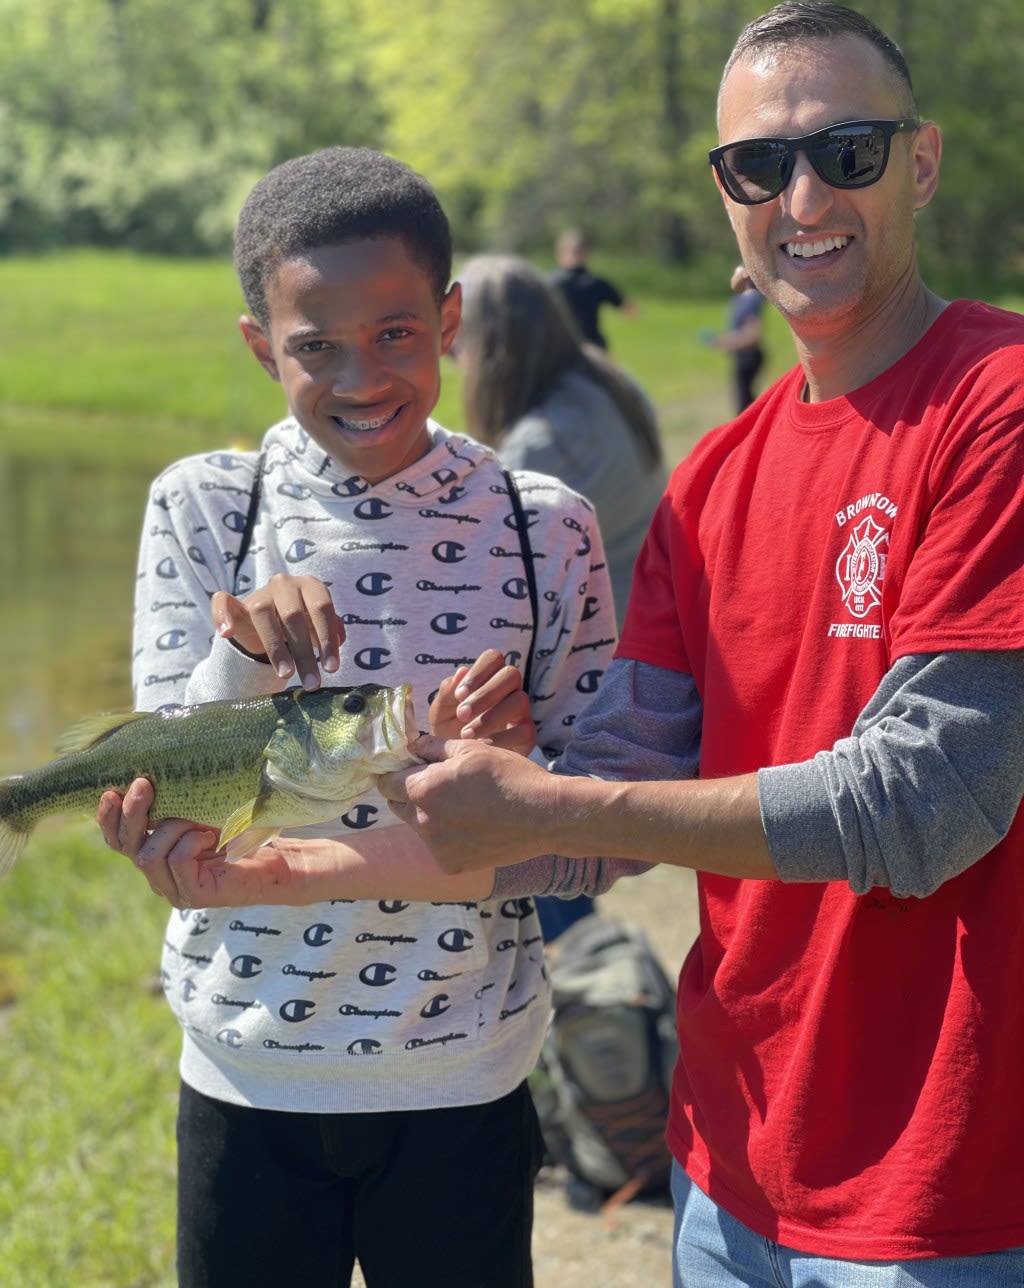 Good catch: Children with special needs ‘reel’ in exciting day at fishing derby